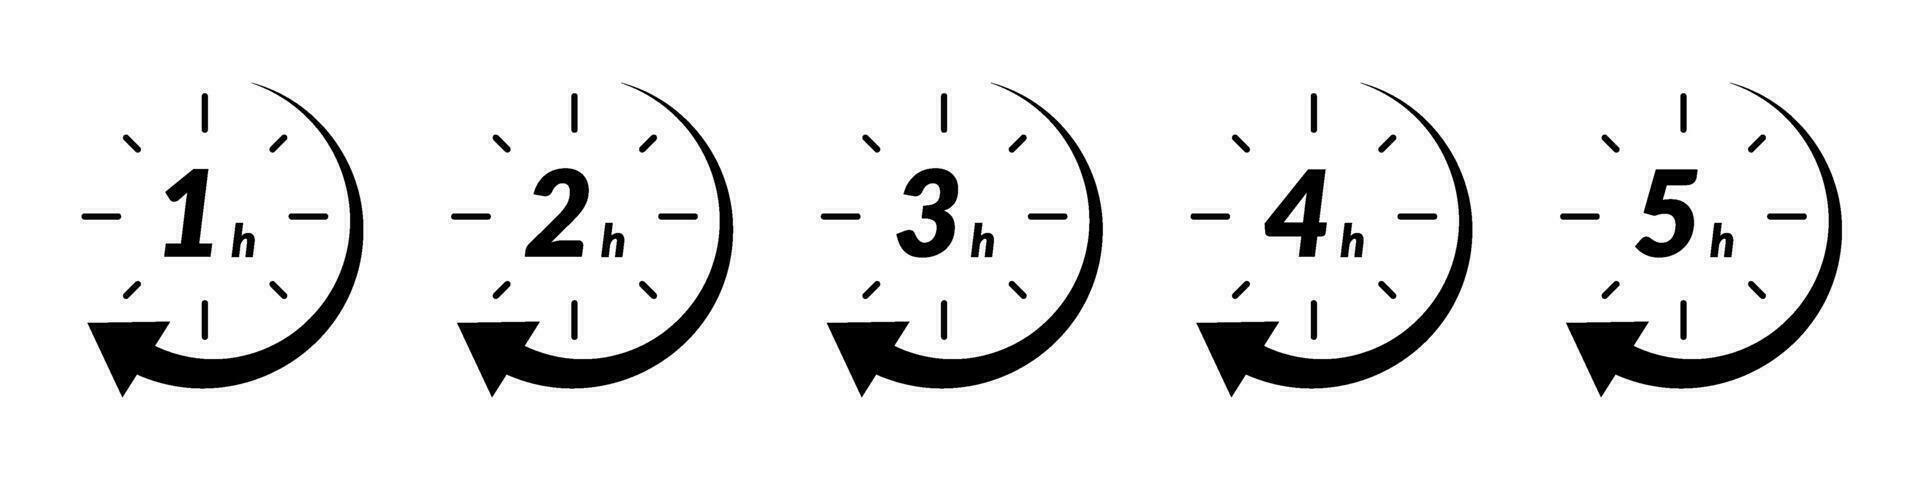 Fast delivery time icon with clock and arrow. for sale, offer, and discount logos. Features 2, 3, 4, and 5-hour marks in circle. Flat vector illustrations isolated in background.